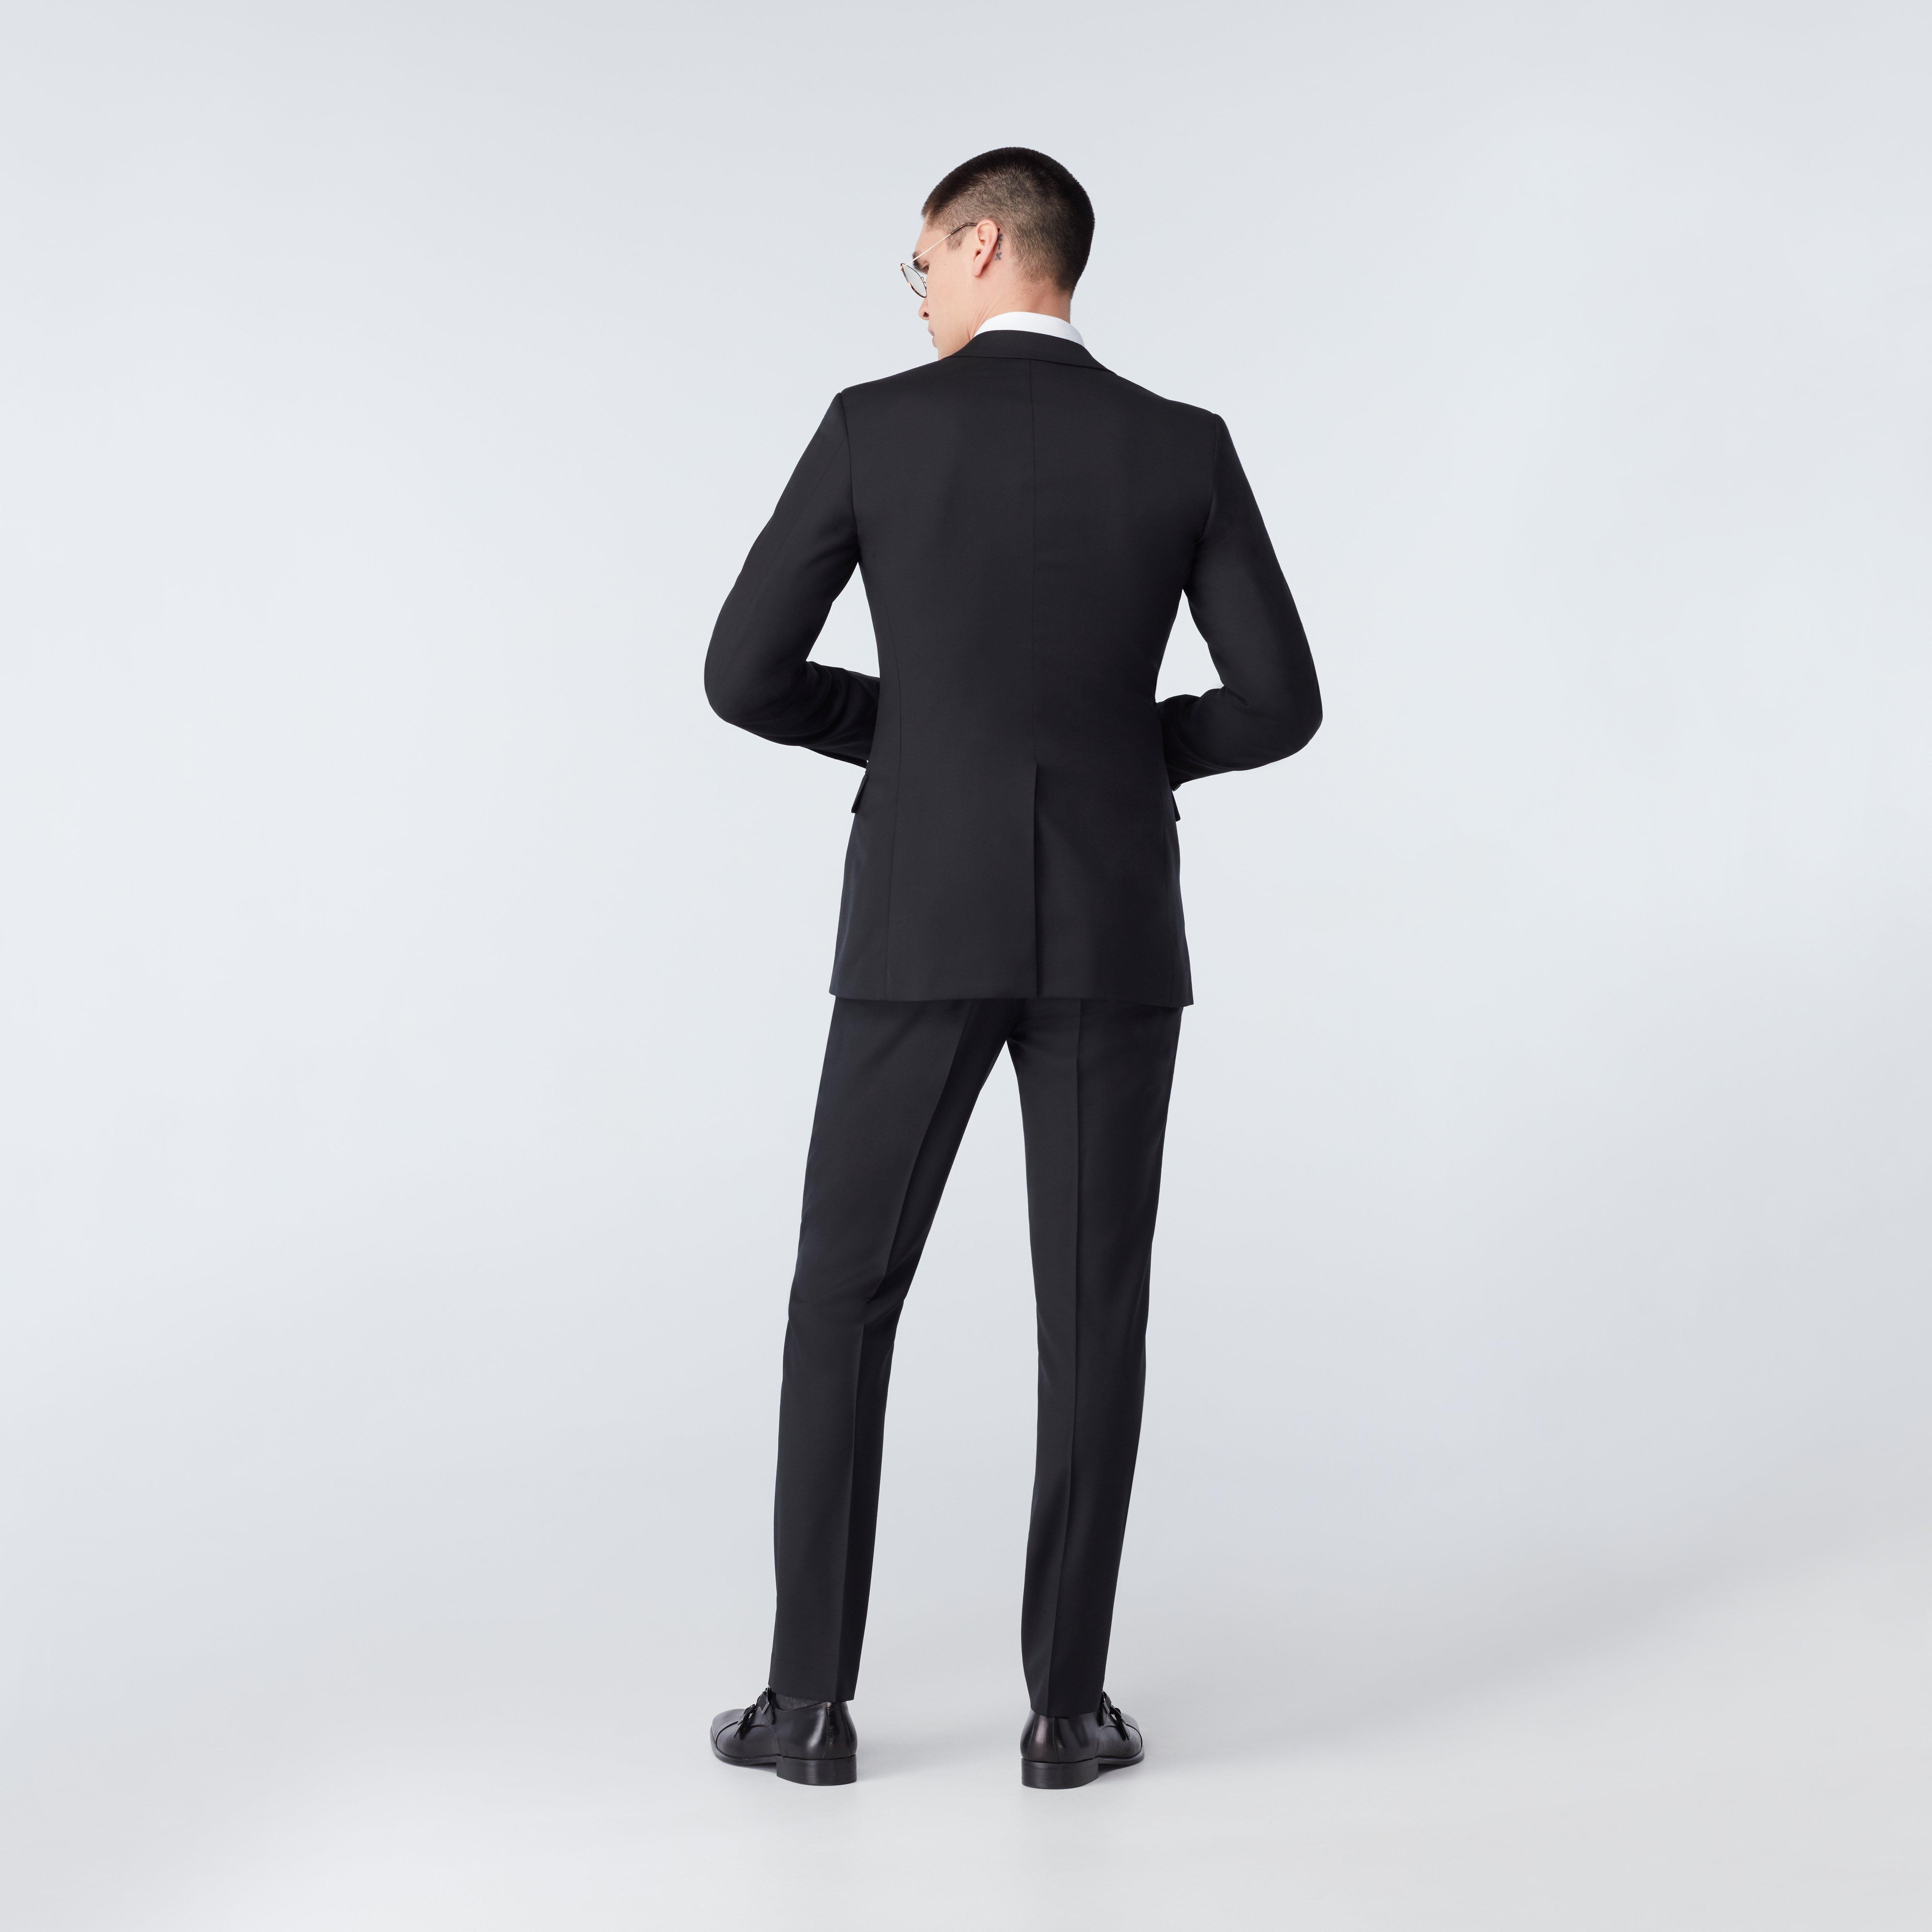 Custom Suits Made For You - Highworth Black Suit | INDOCHINO